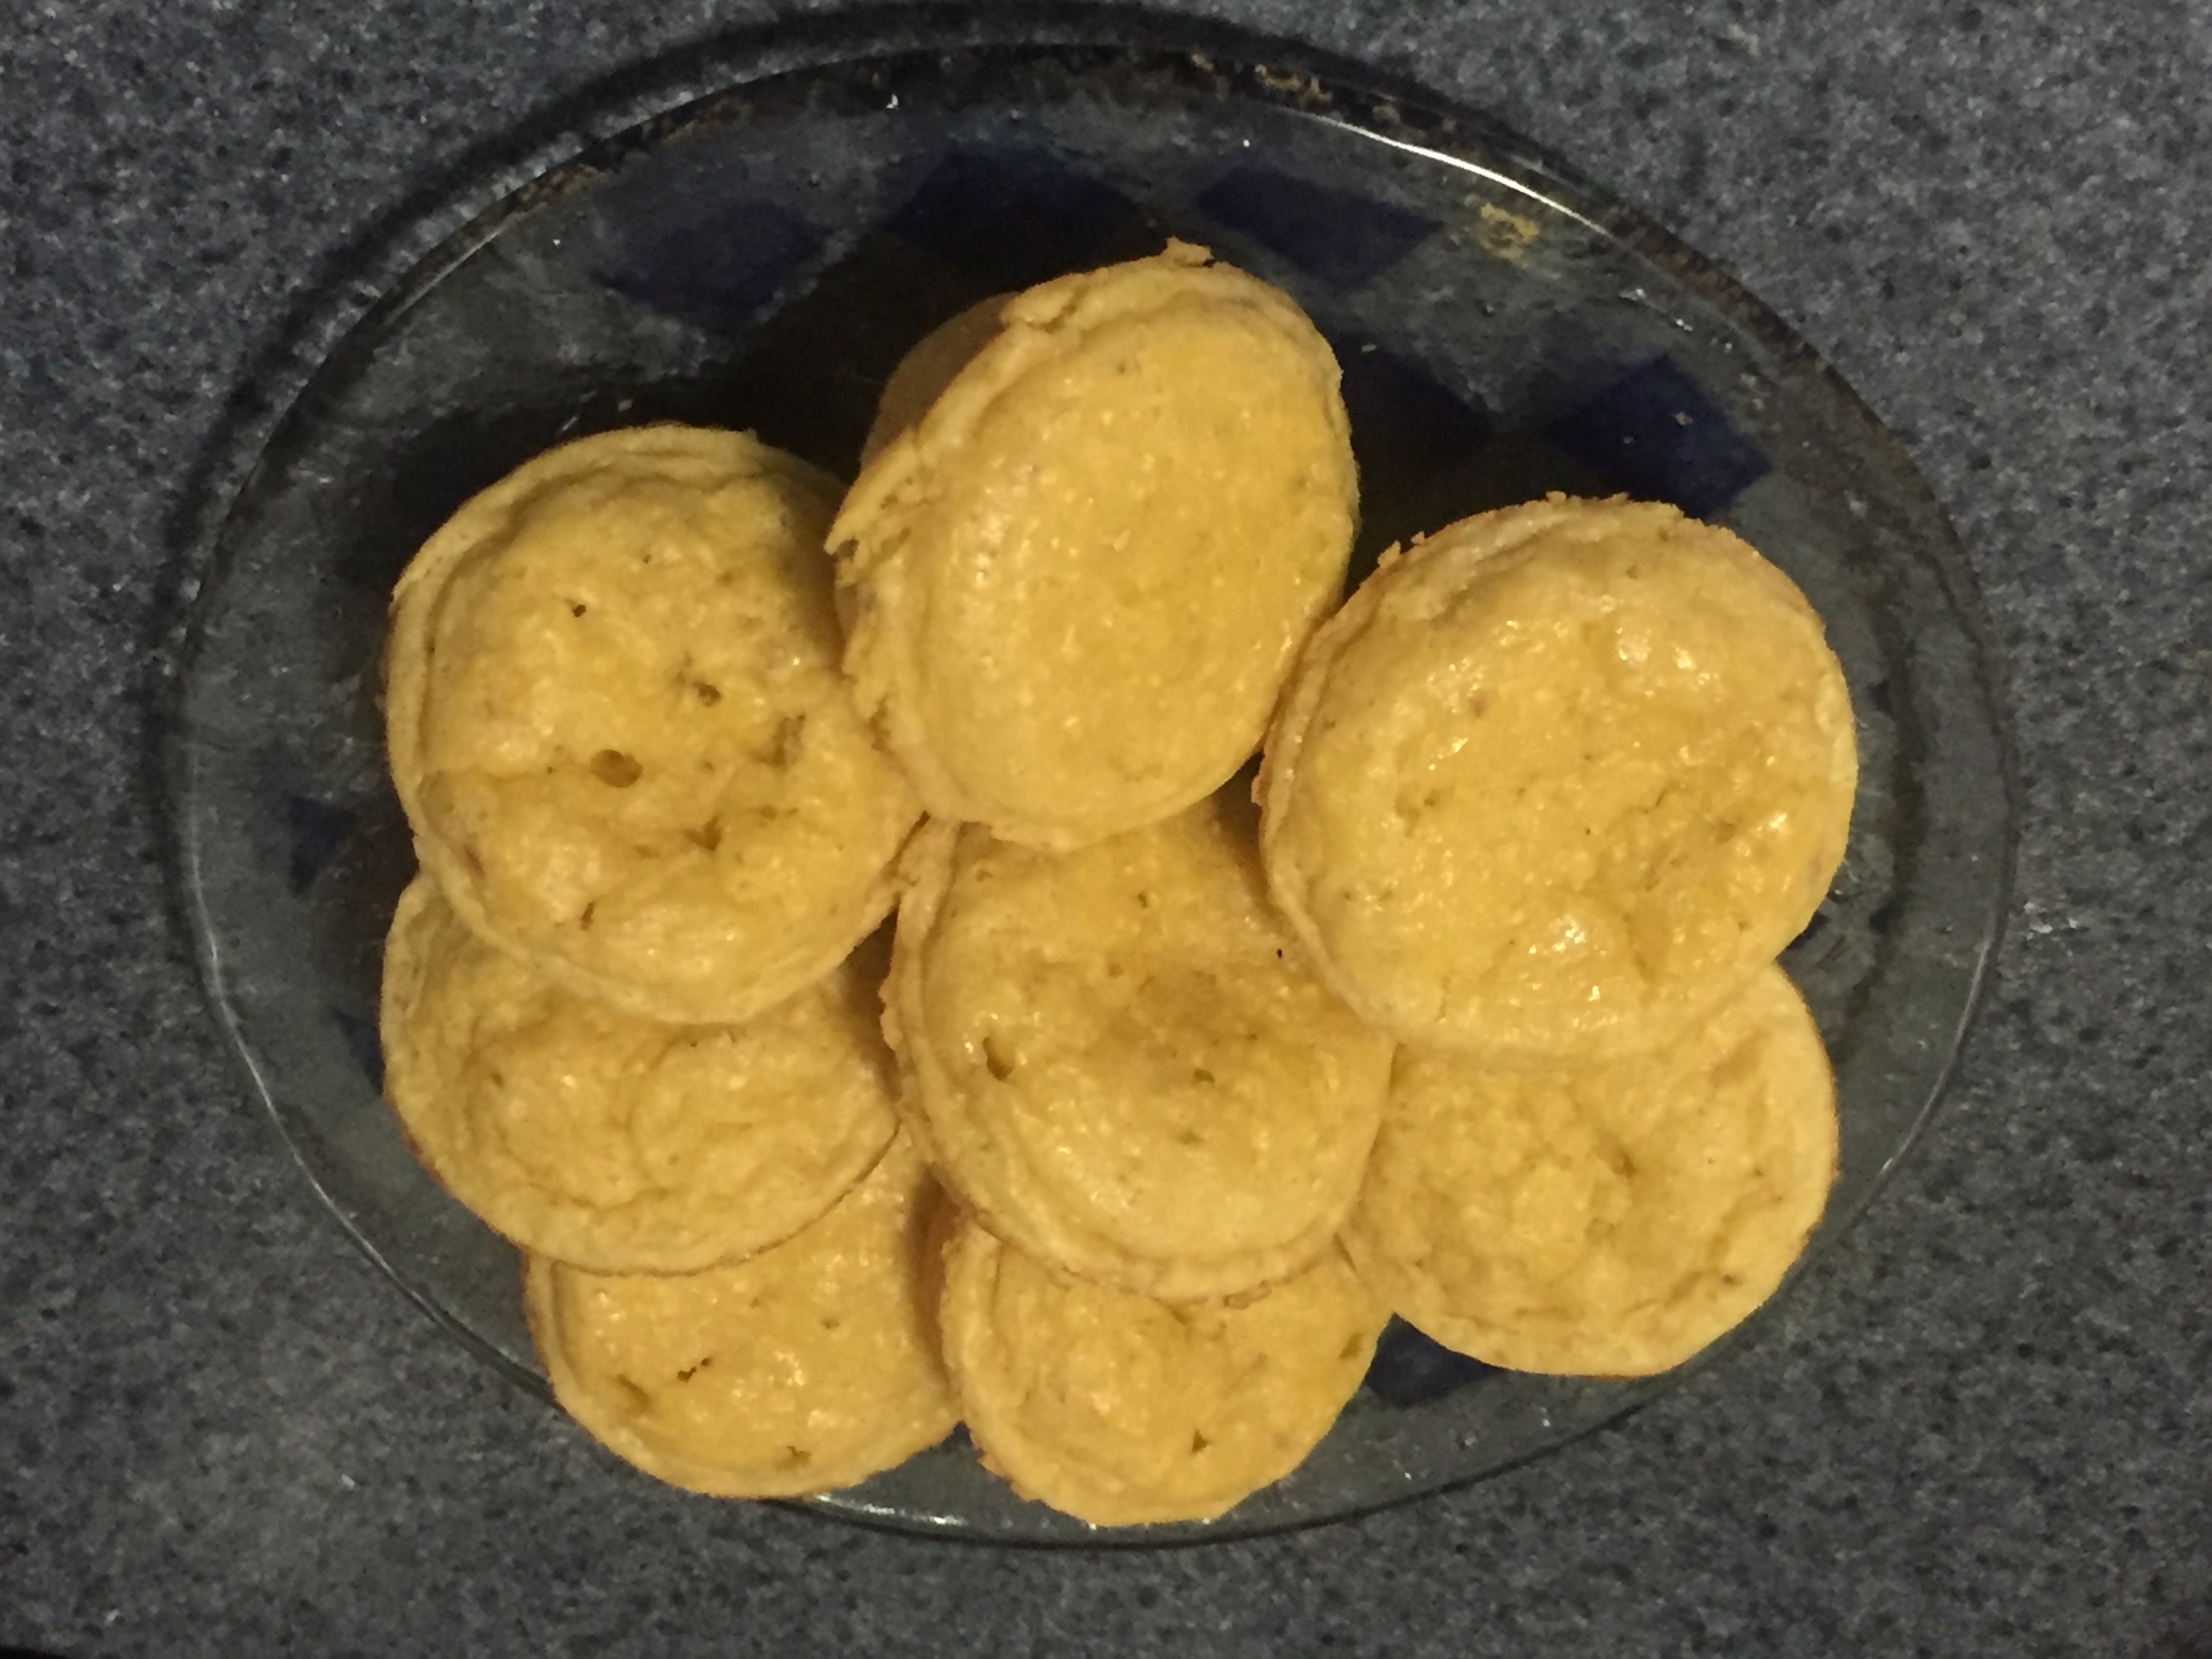 8 small corn muffins on a round clear glass plate with blue check pattern.